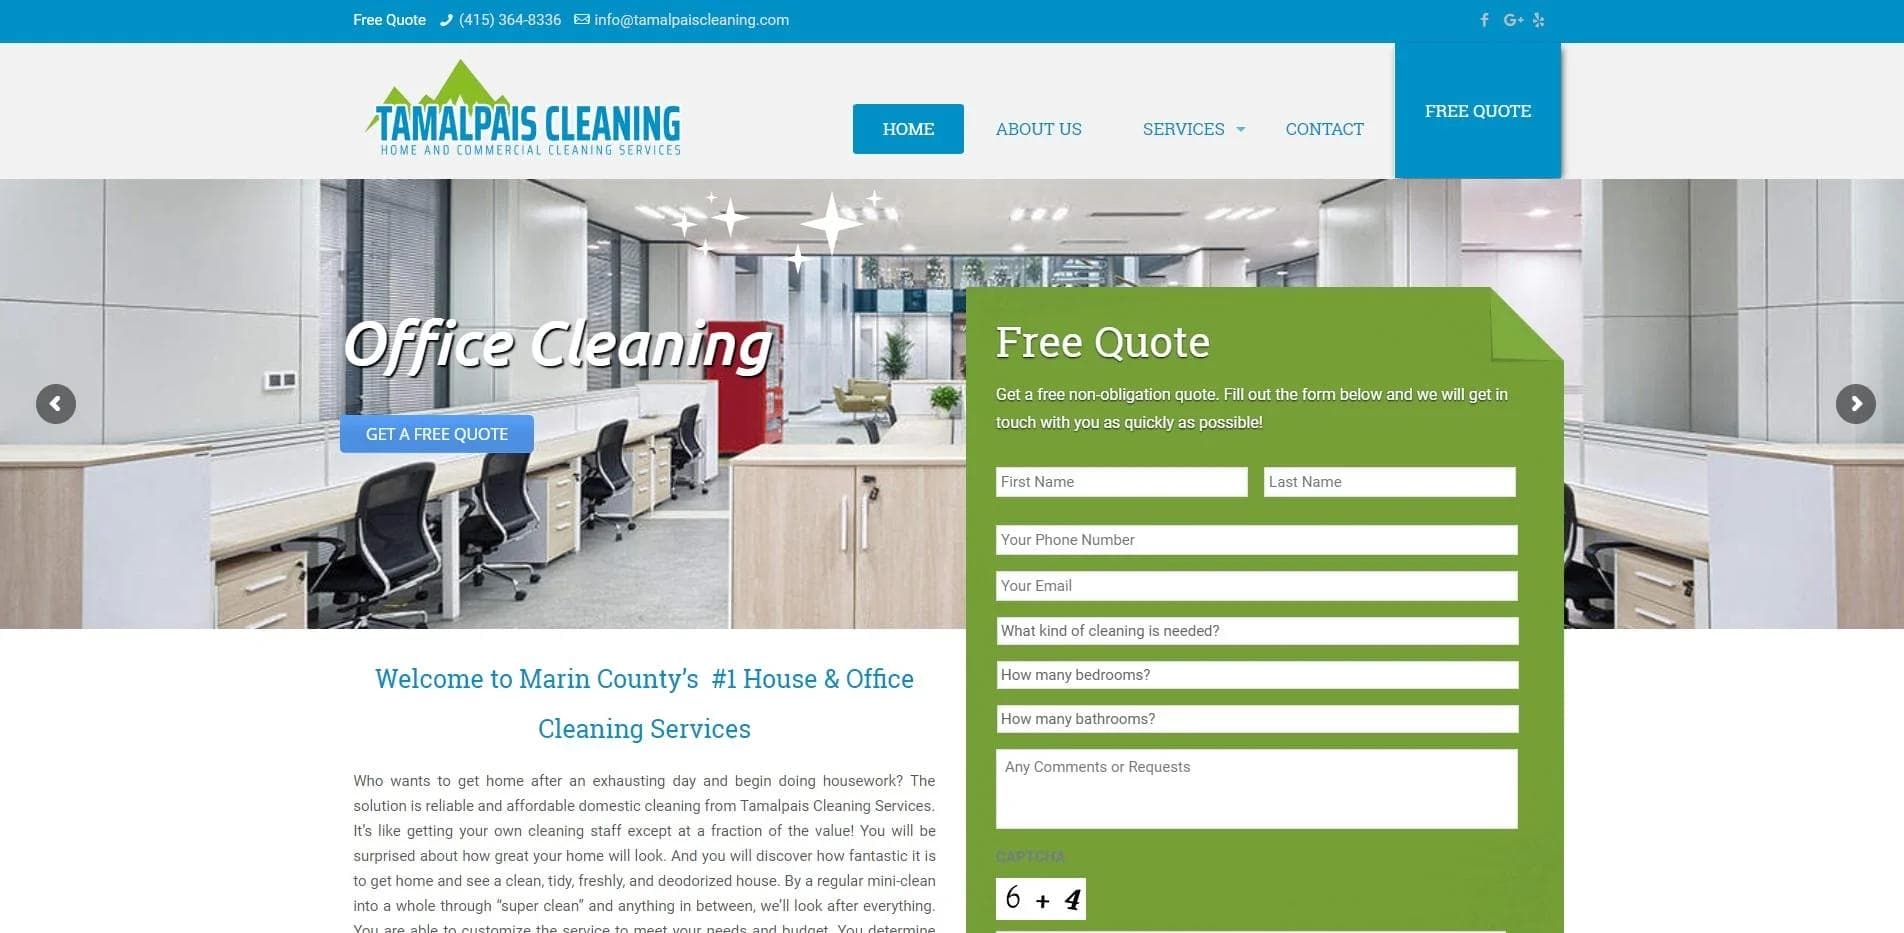 Tamalpais Cleaning Services 4